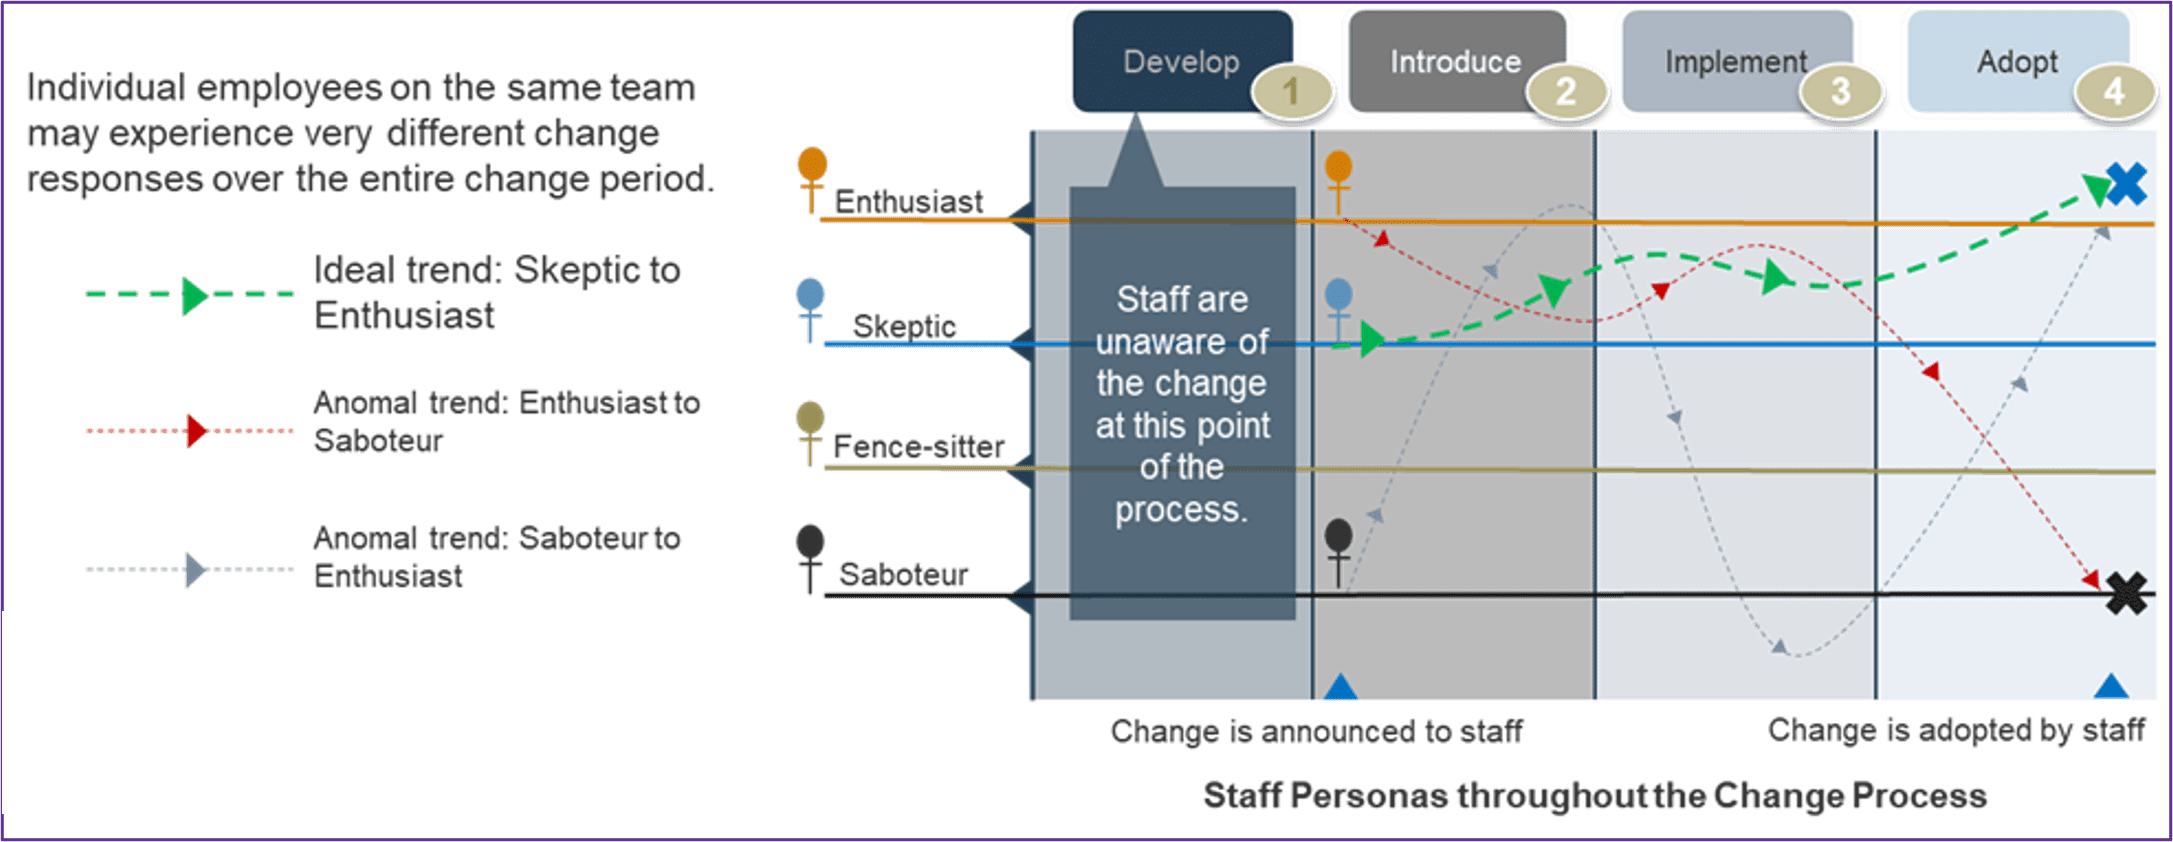 an image showing staff personas at different stages through the change process.